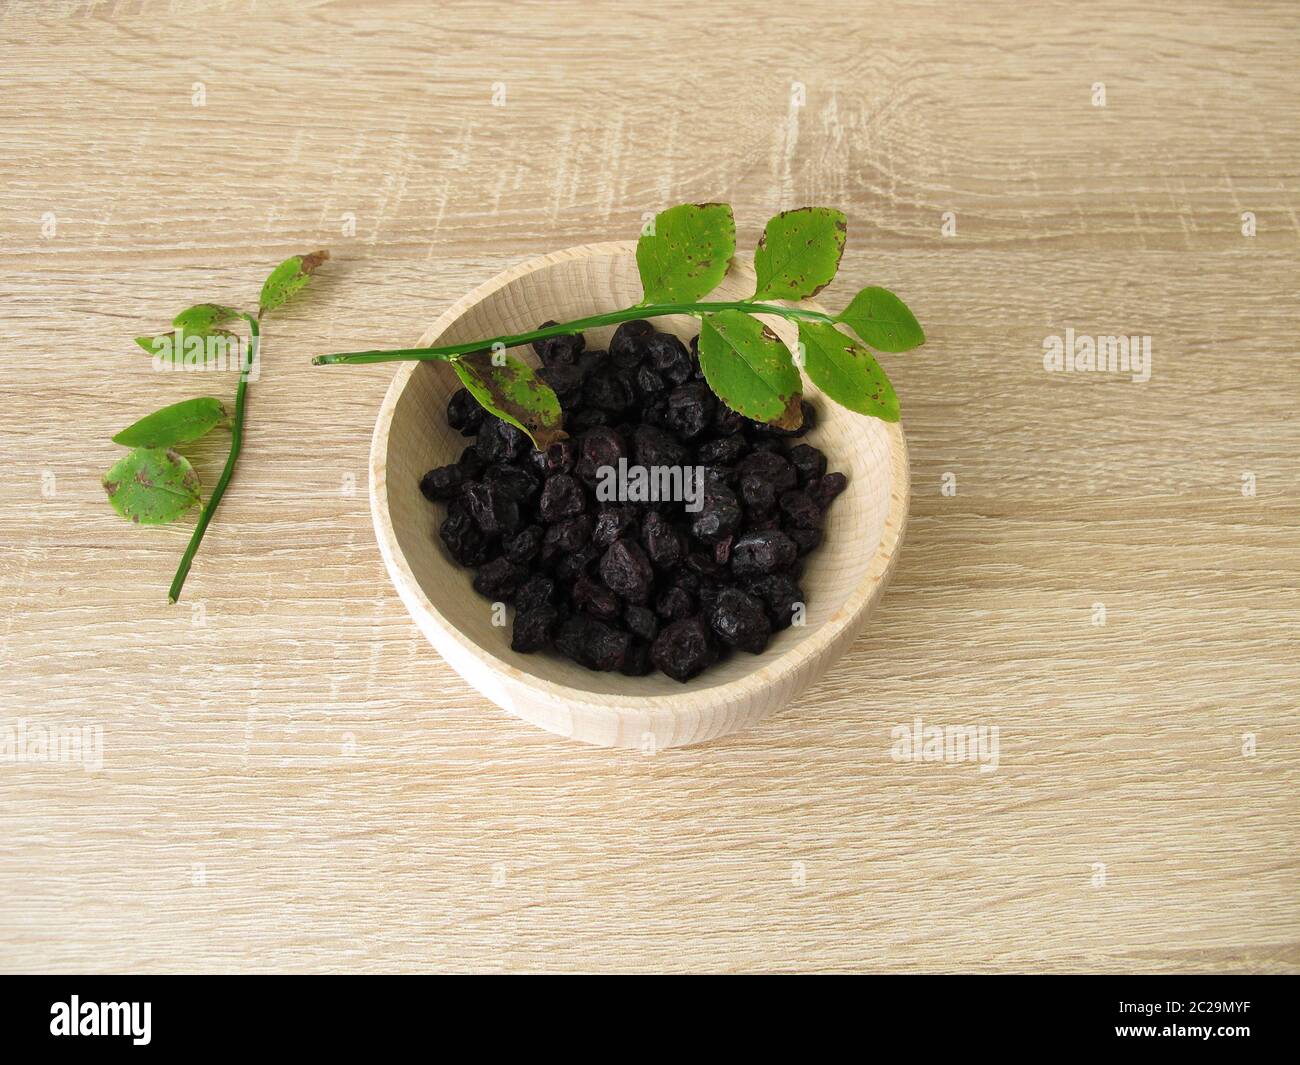 Dried blueberries in a wooden bowl Stock Photo